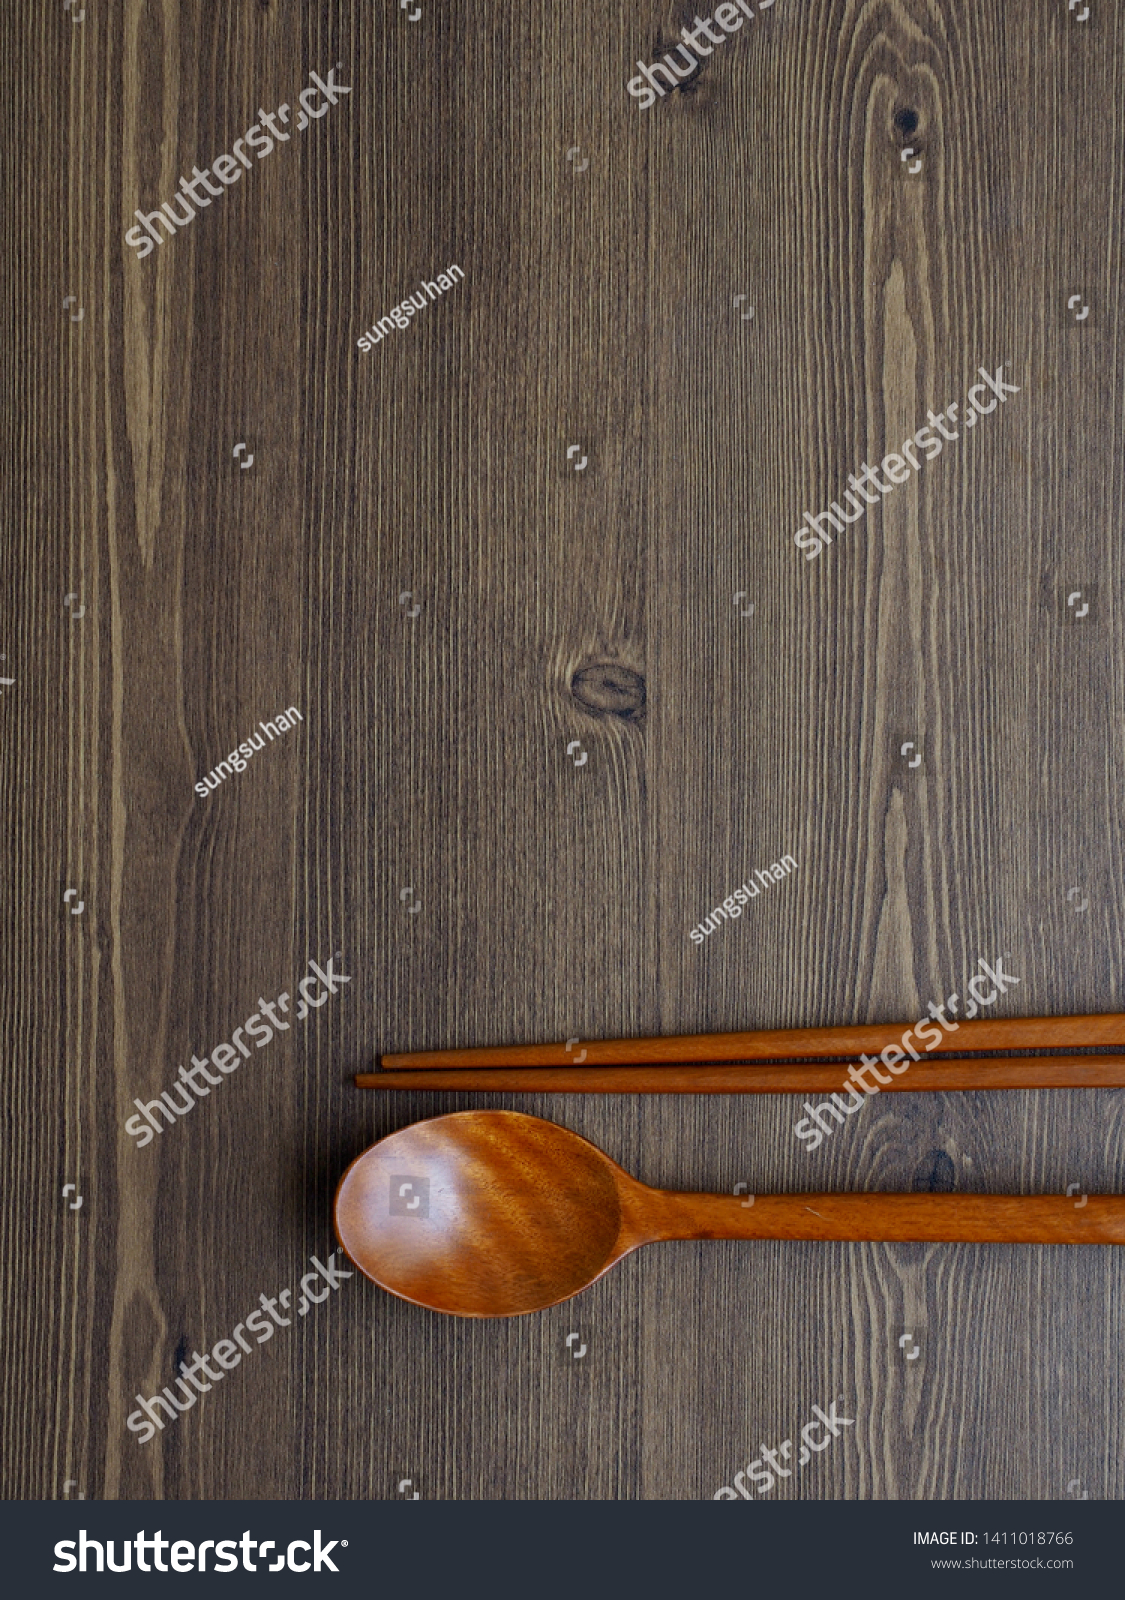 Wooden spoon, Wooden chopsticks and Wooden board background
 #1411018766